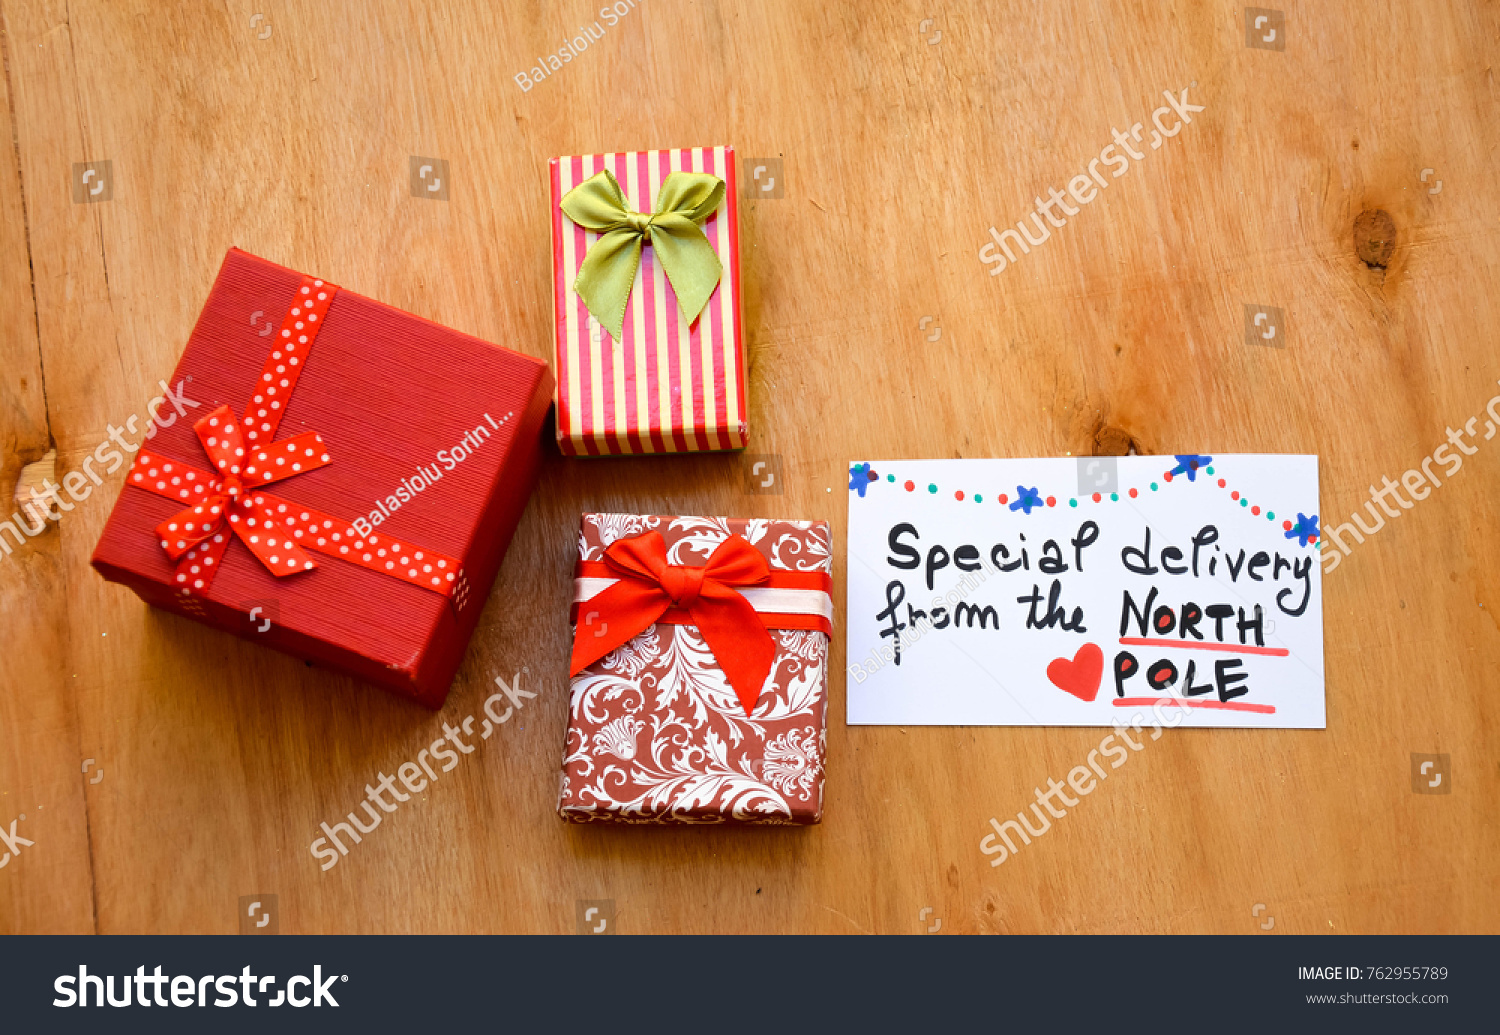 Christmas Gifts Special Delivery North Pole Stock Photo Edit Now 762955789